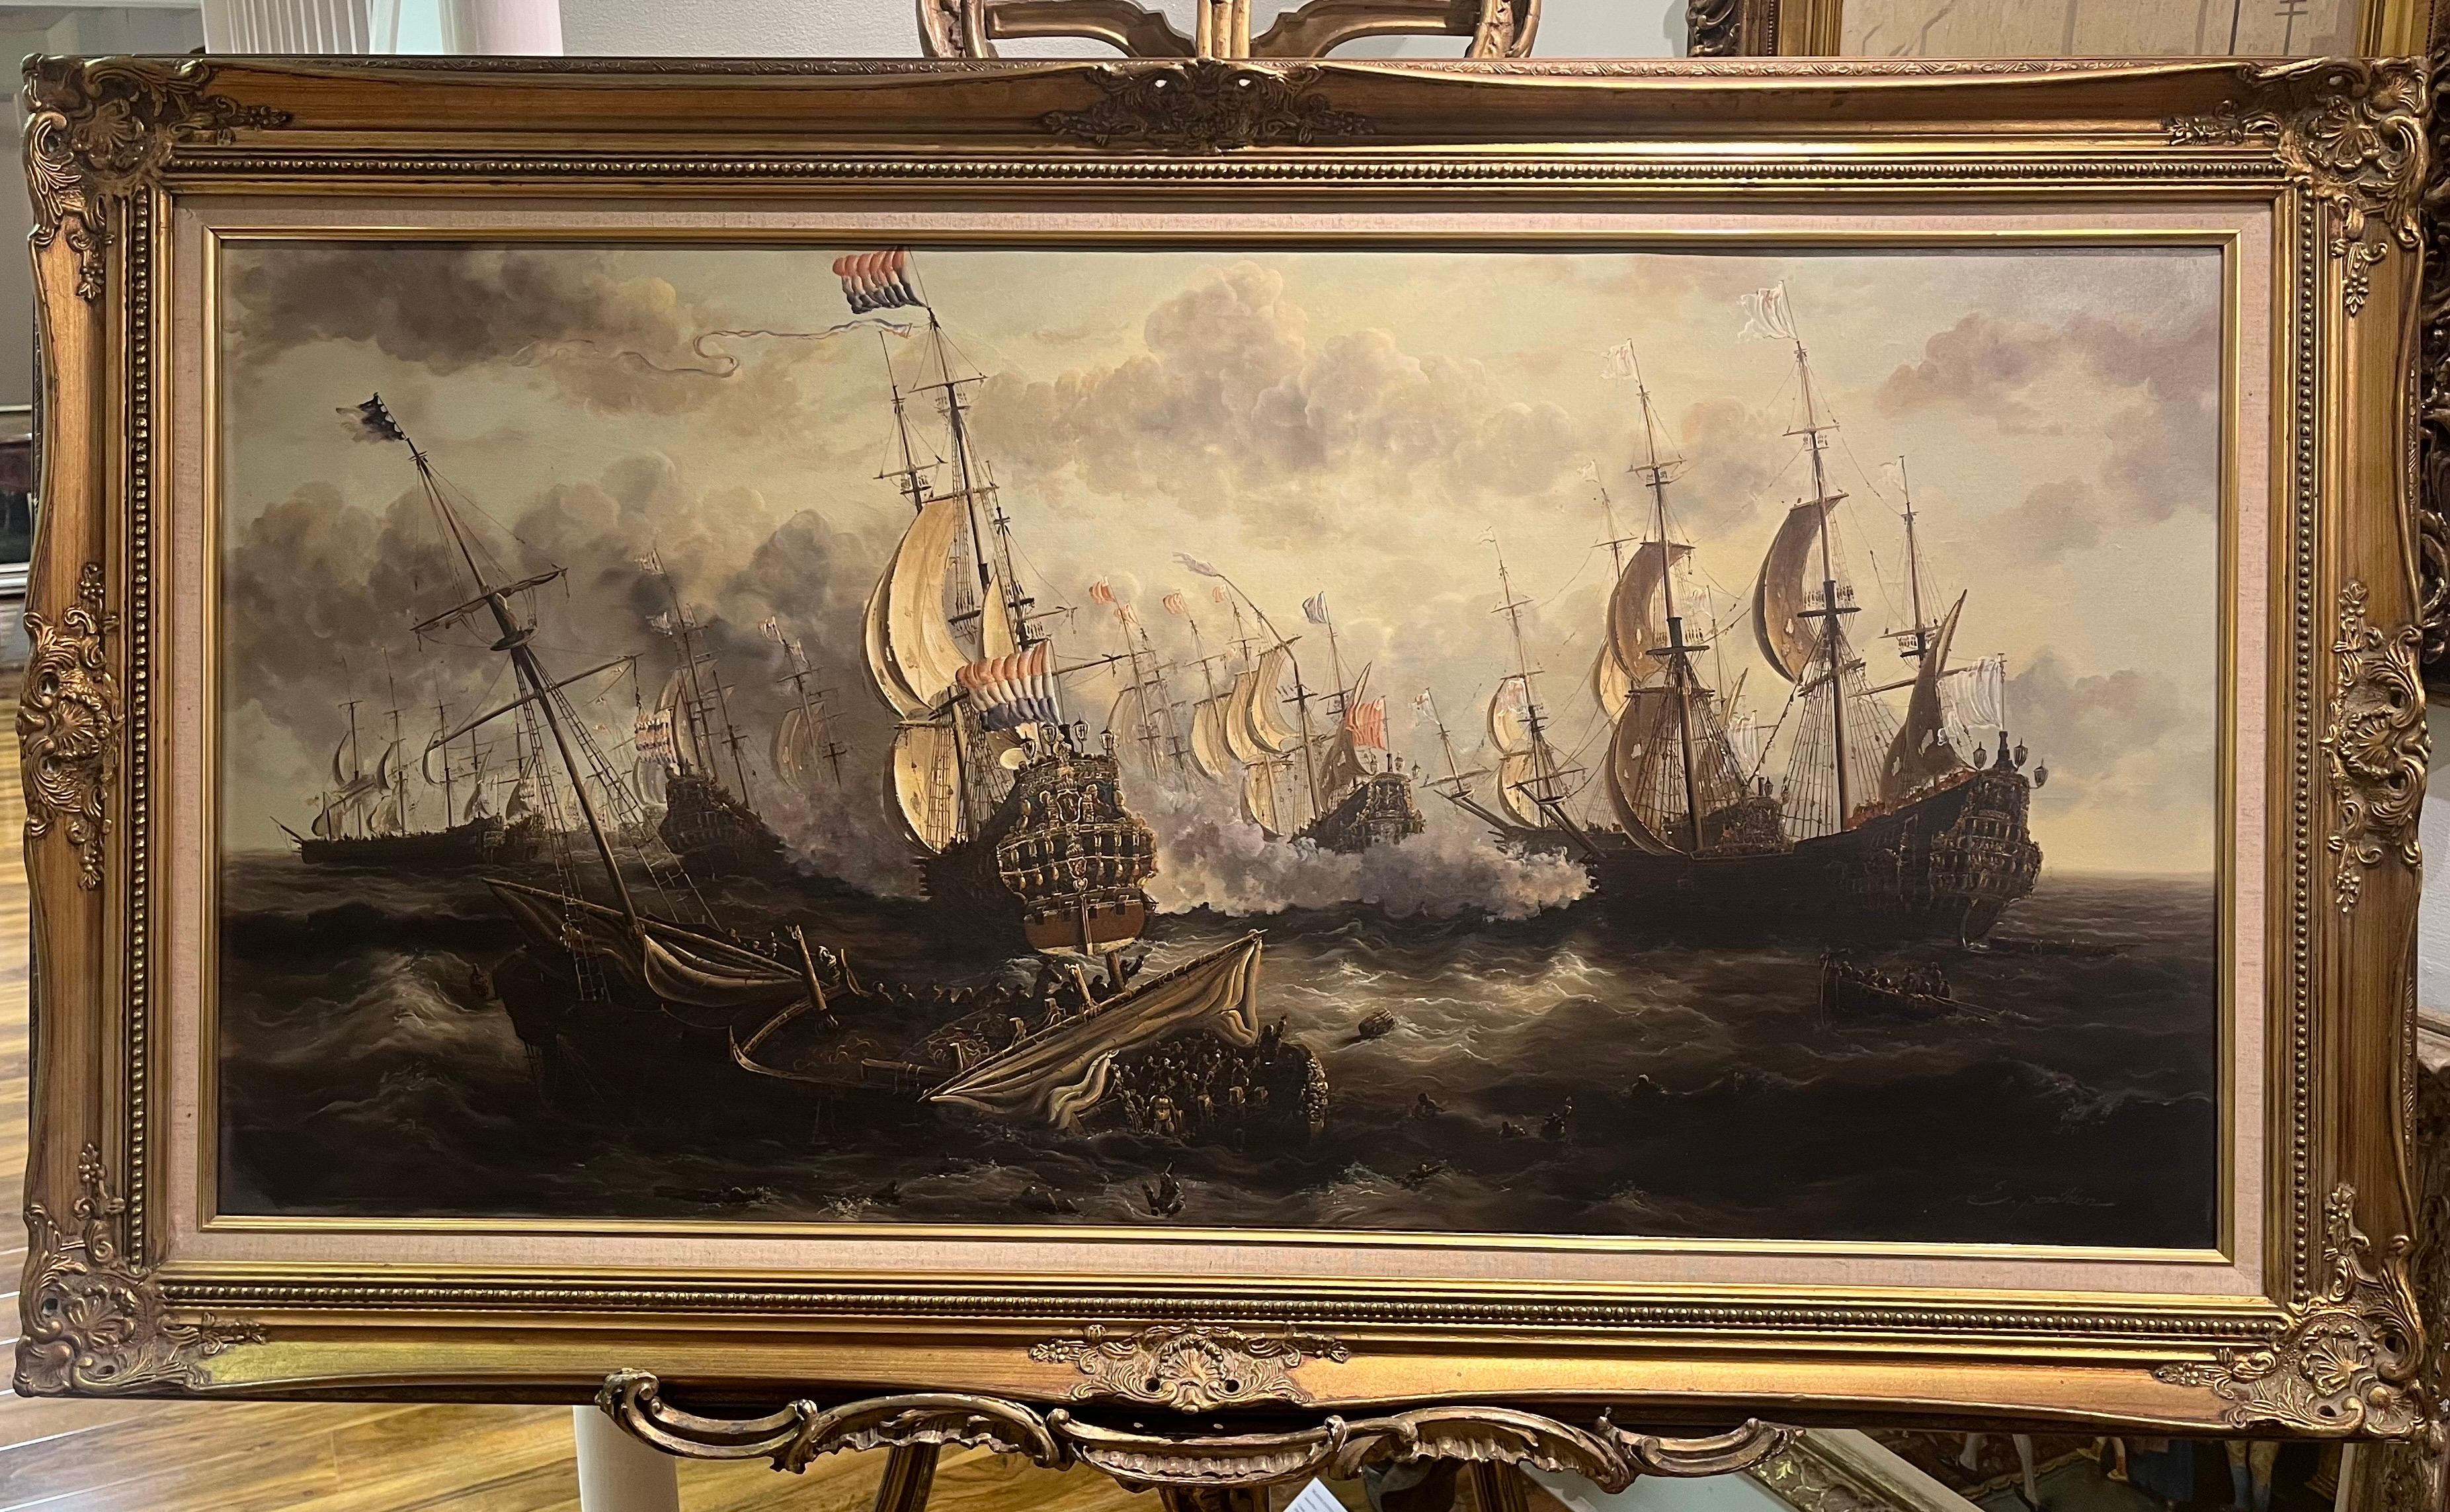 E ponthier Landscape Painting - HUGE OIL PAINTING MARITIME SHIP MASTER PIECE 20th CENTURY NICE GOLD GILT FRAME